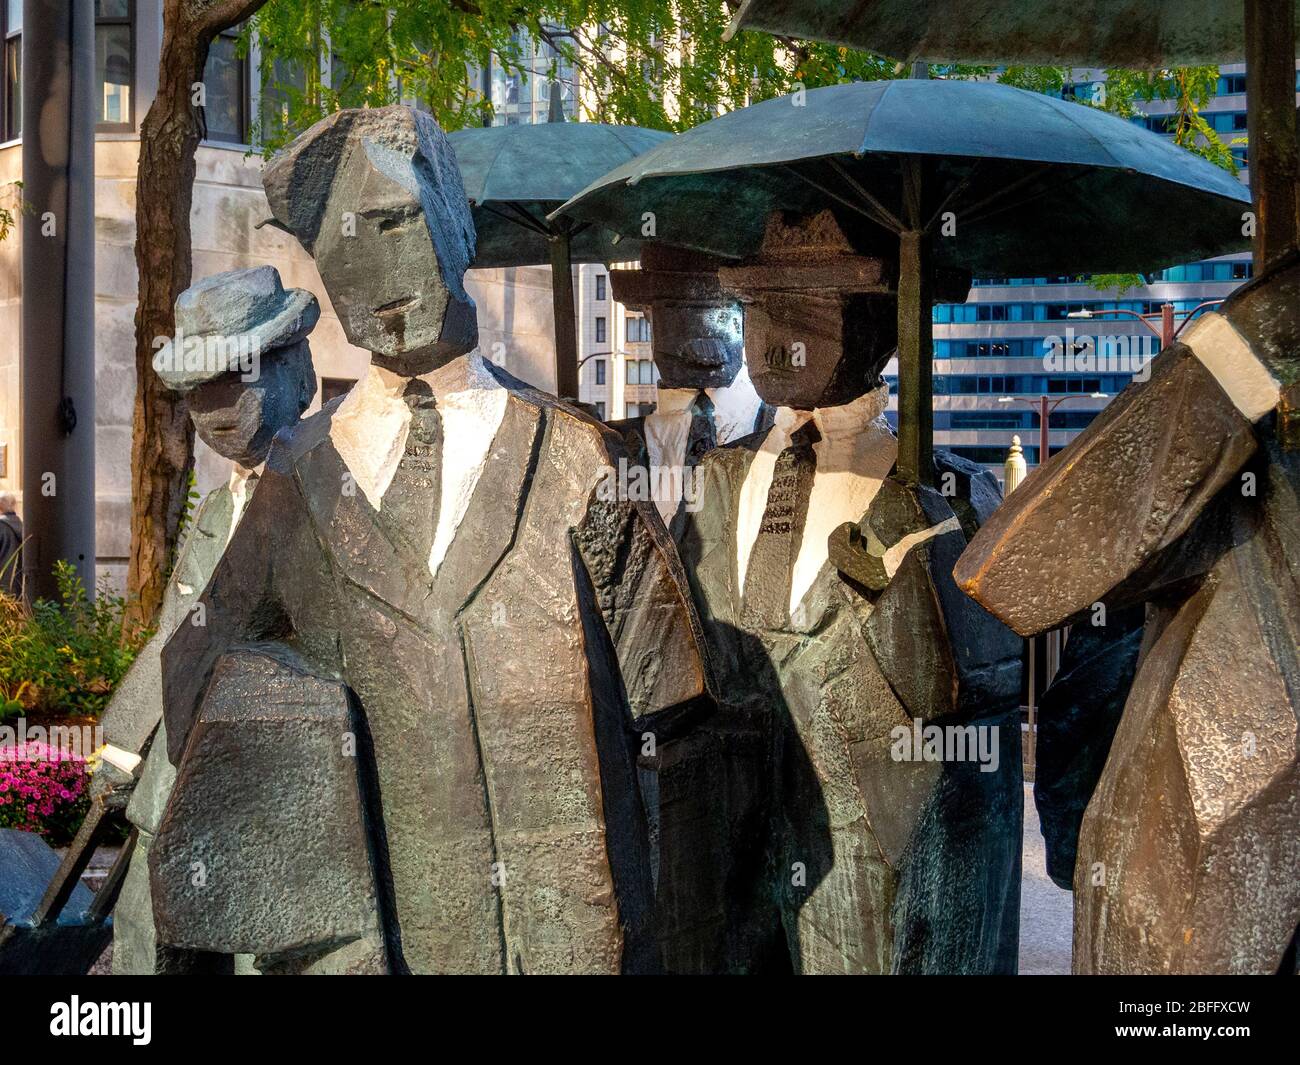 The Living World Series Gentlemen Statue by Taiwanese sculptor Ju Ming This artwork is prominently displayed on the Chicago AMA Plaza. The Gentlemen are part of Ju’s “Living World Series,” featuring eleven bronze plated figures draped in trench jackets and holding umbrellas. Blocky and minimalist, the figures are reduced to the basic forms intentionally to embrace the inner spiritual qualities within human bodies. Stock Photo